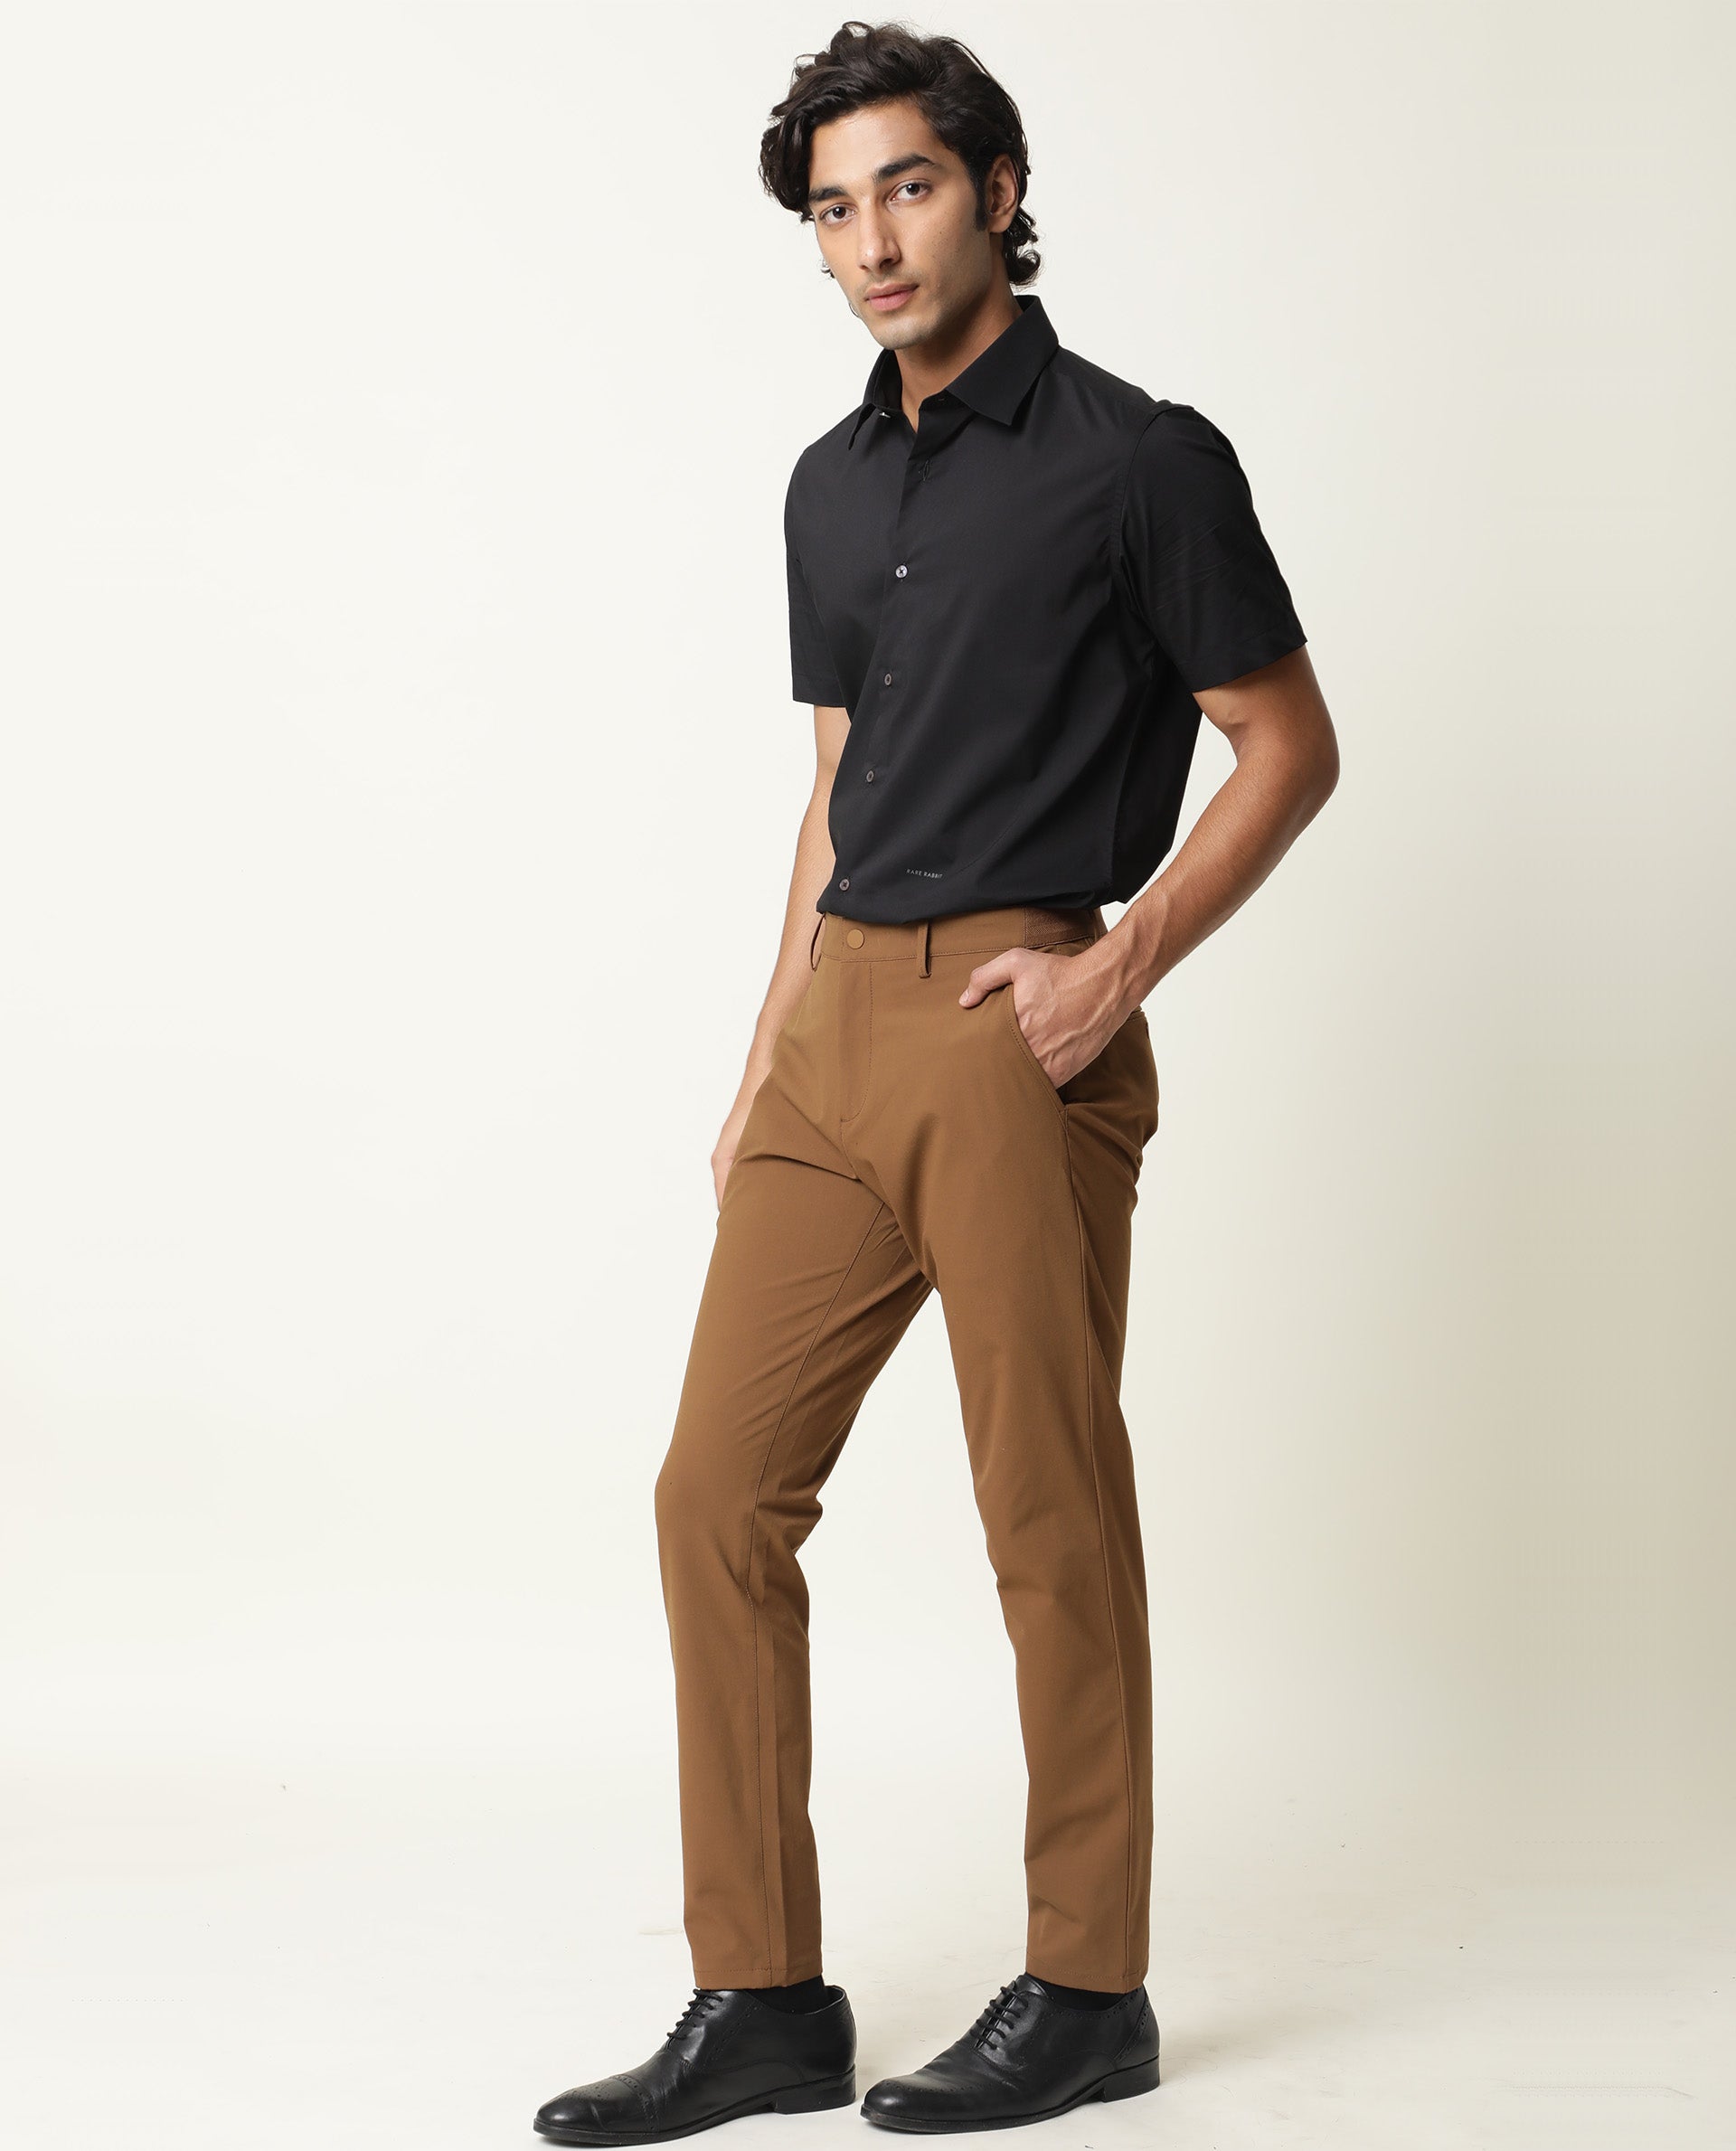 Man wearing black shirt and brown pants leaning on wall photo  Free Grey  Image on Unsplash